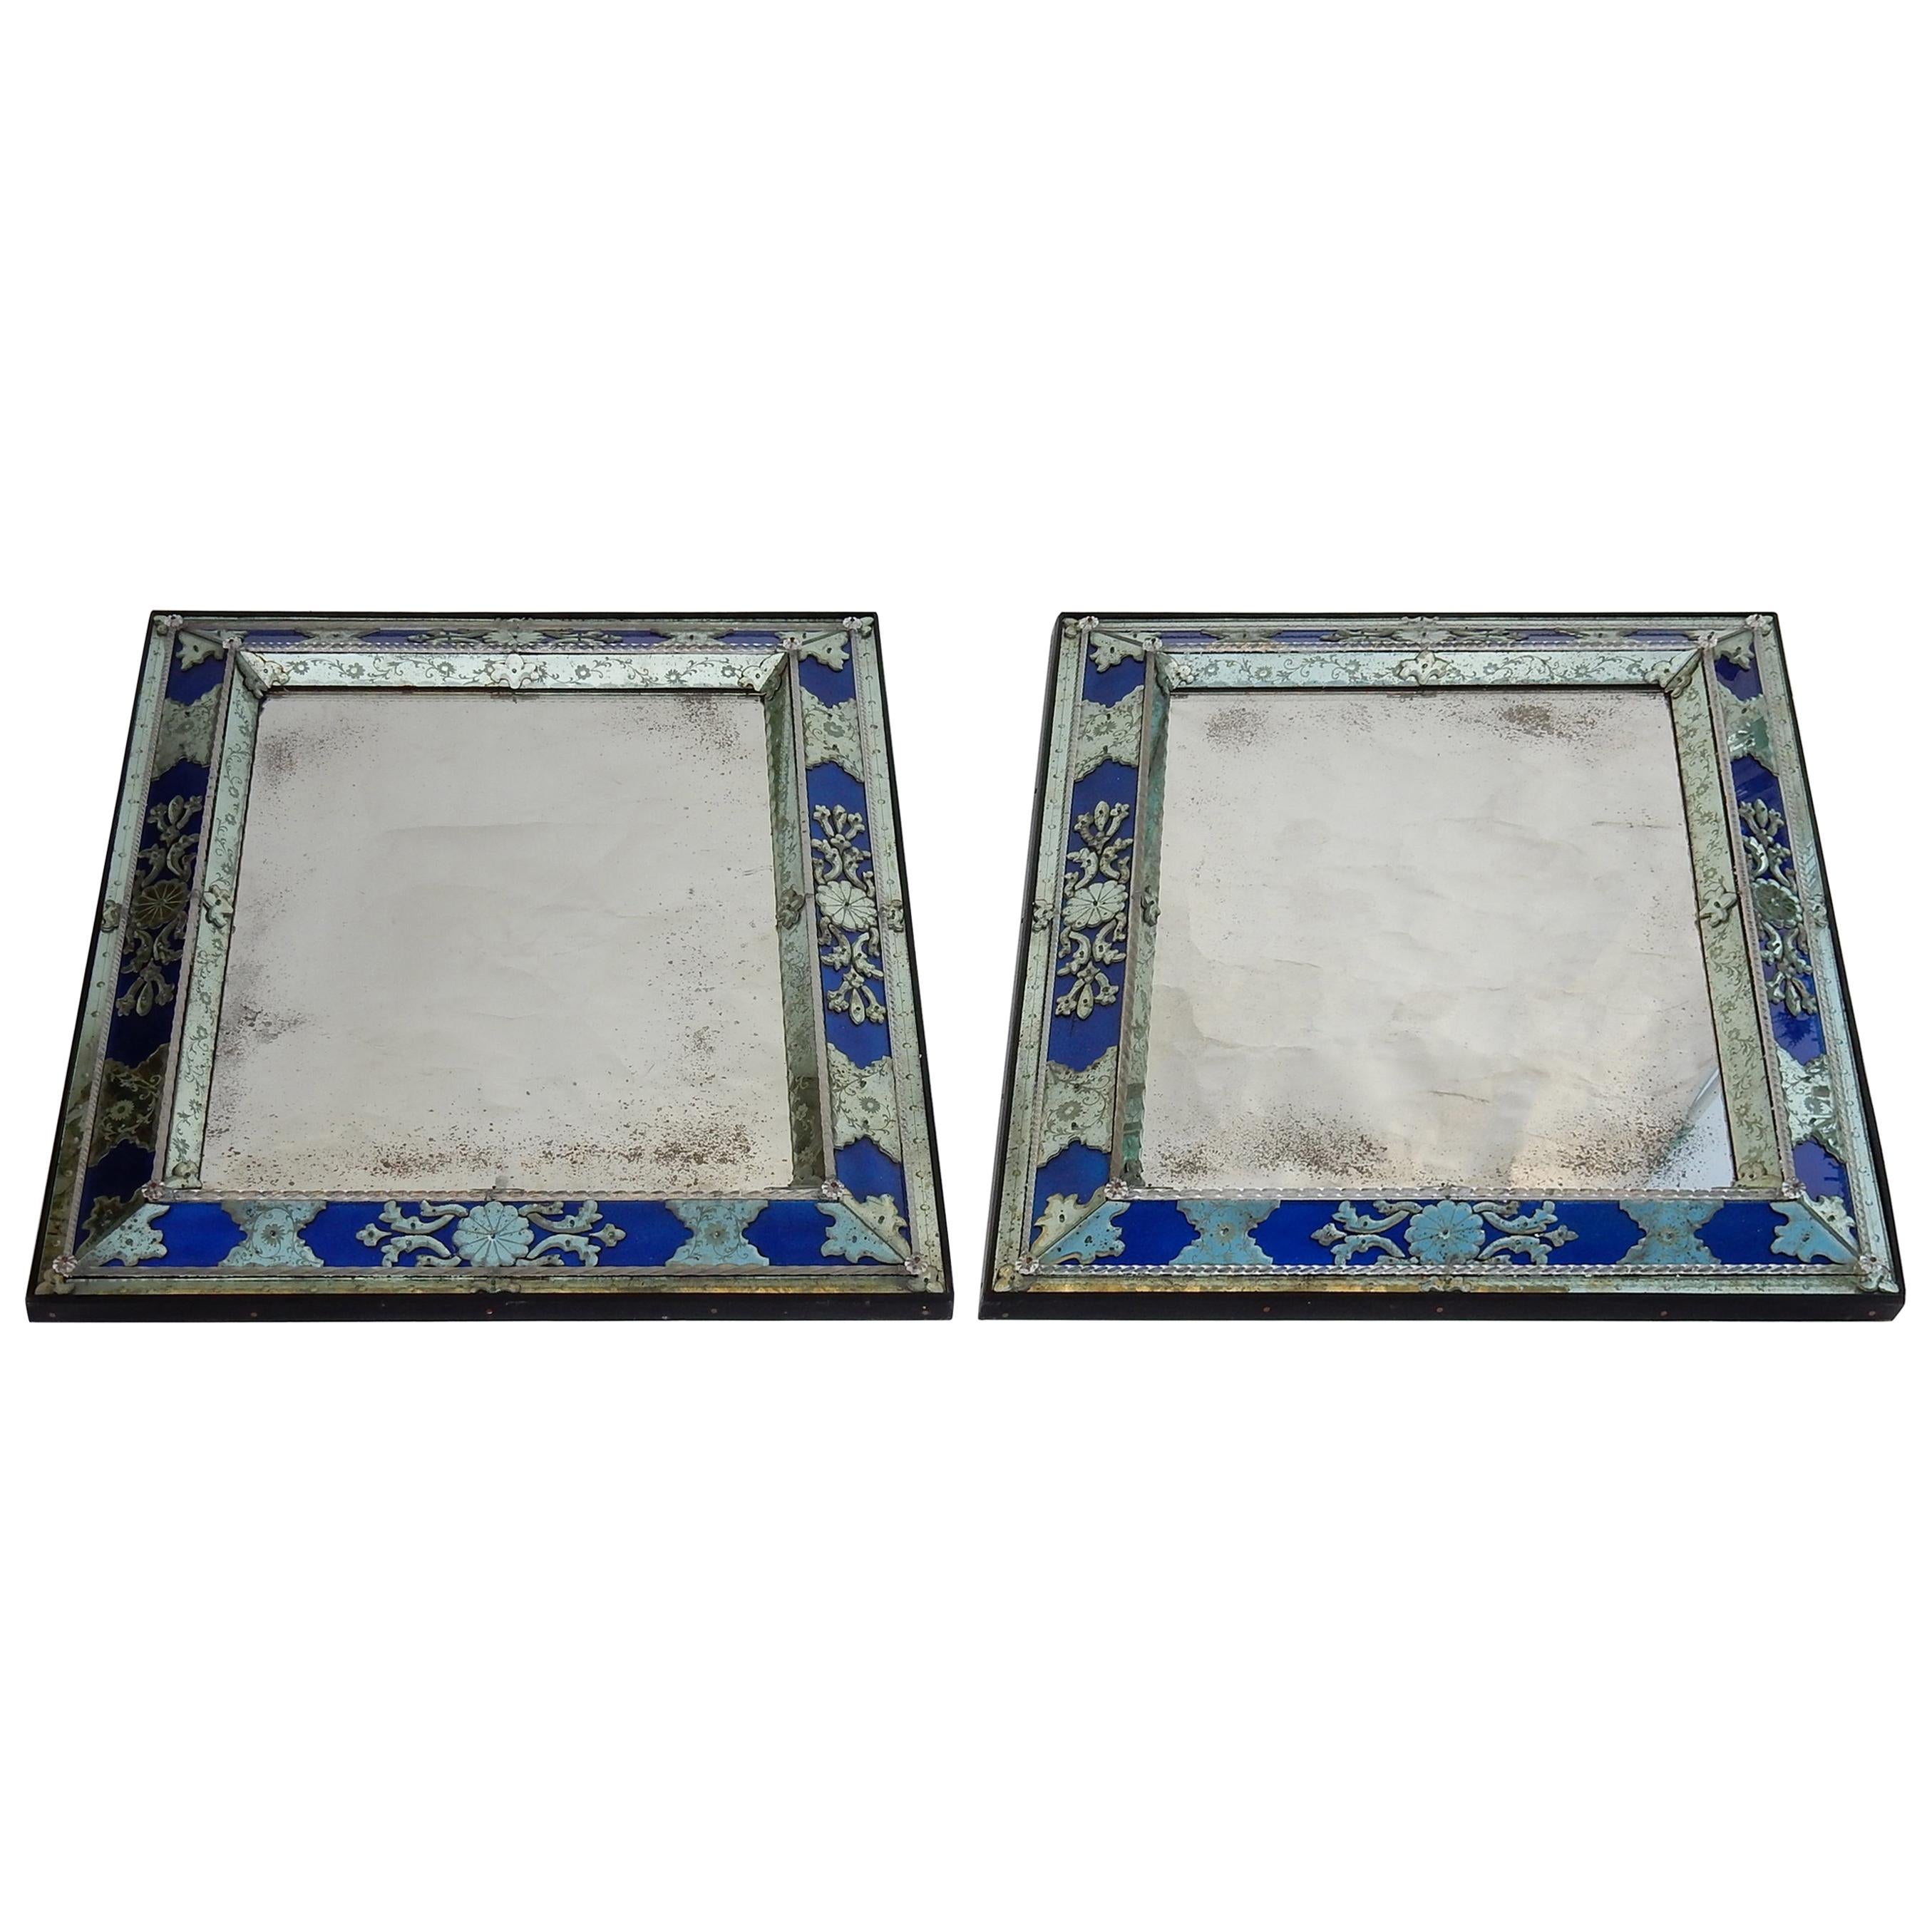 1970-1980 Pair of Louis XIV Style Venice Mirrors with Blue Glass Ornaments For Sale